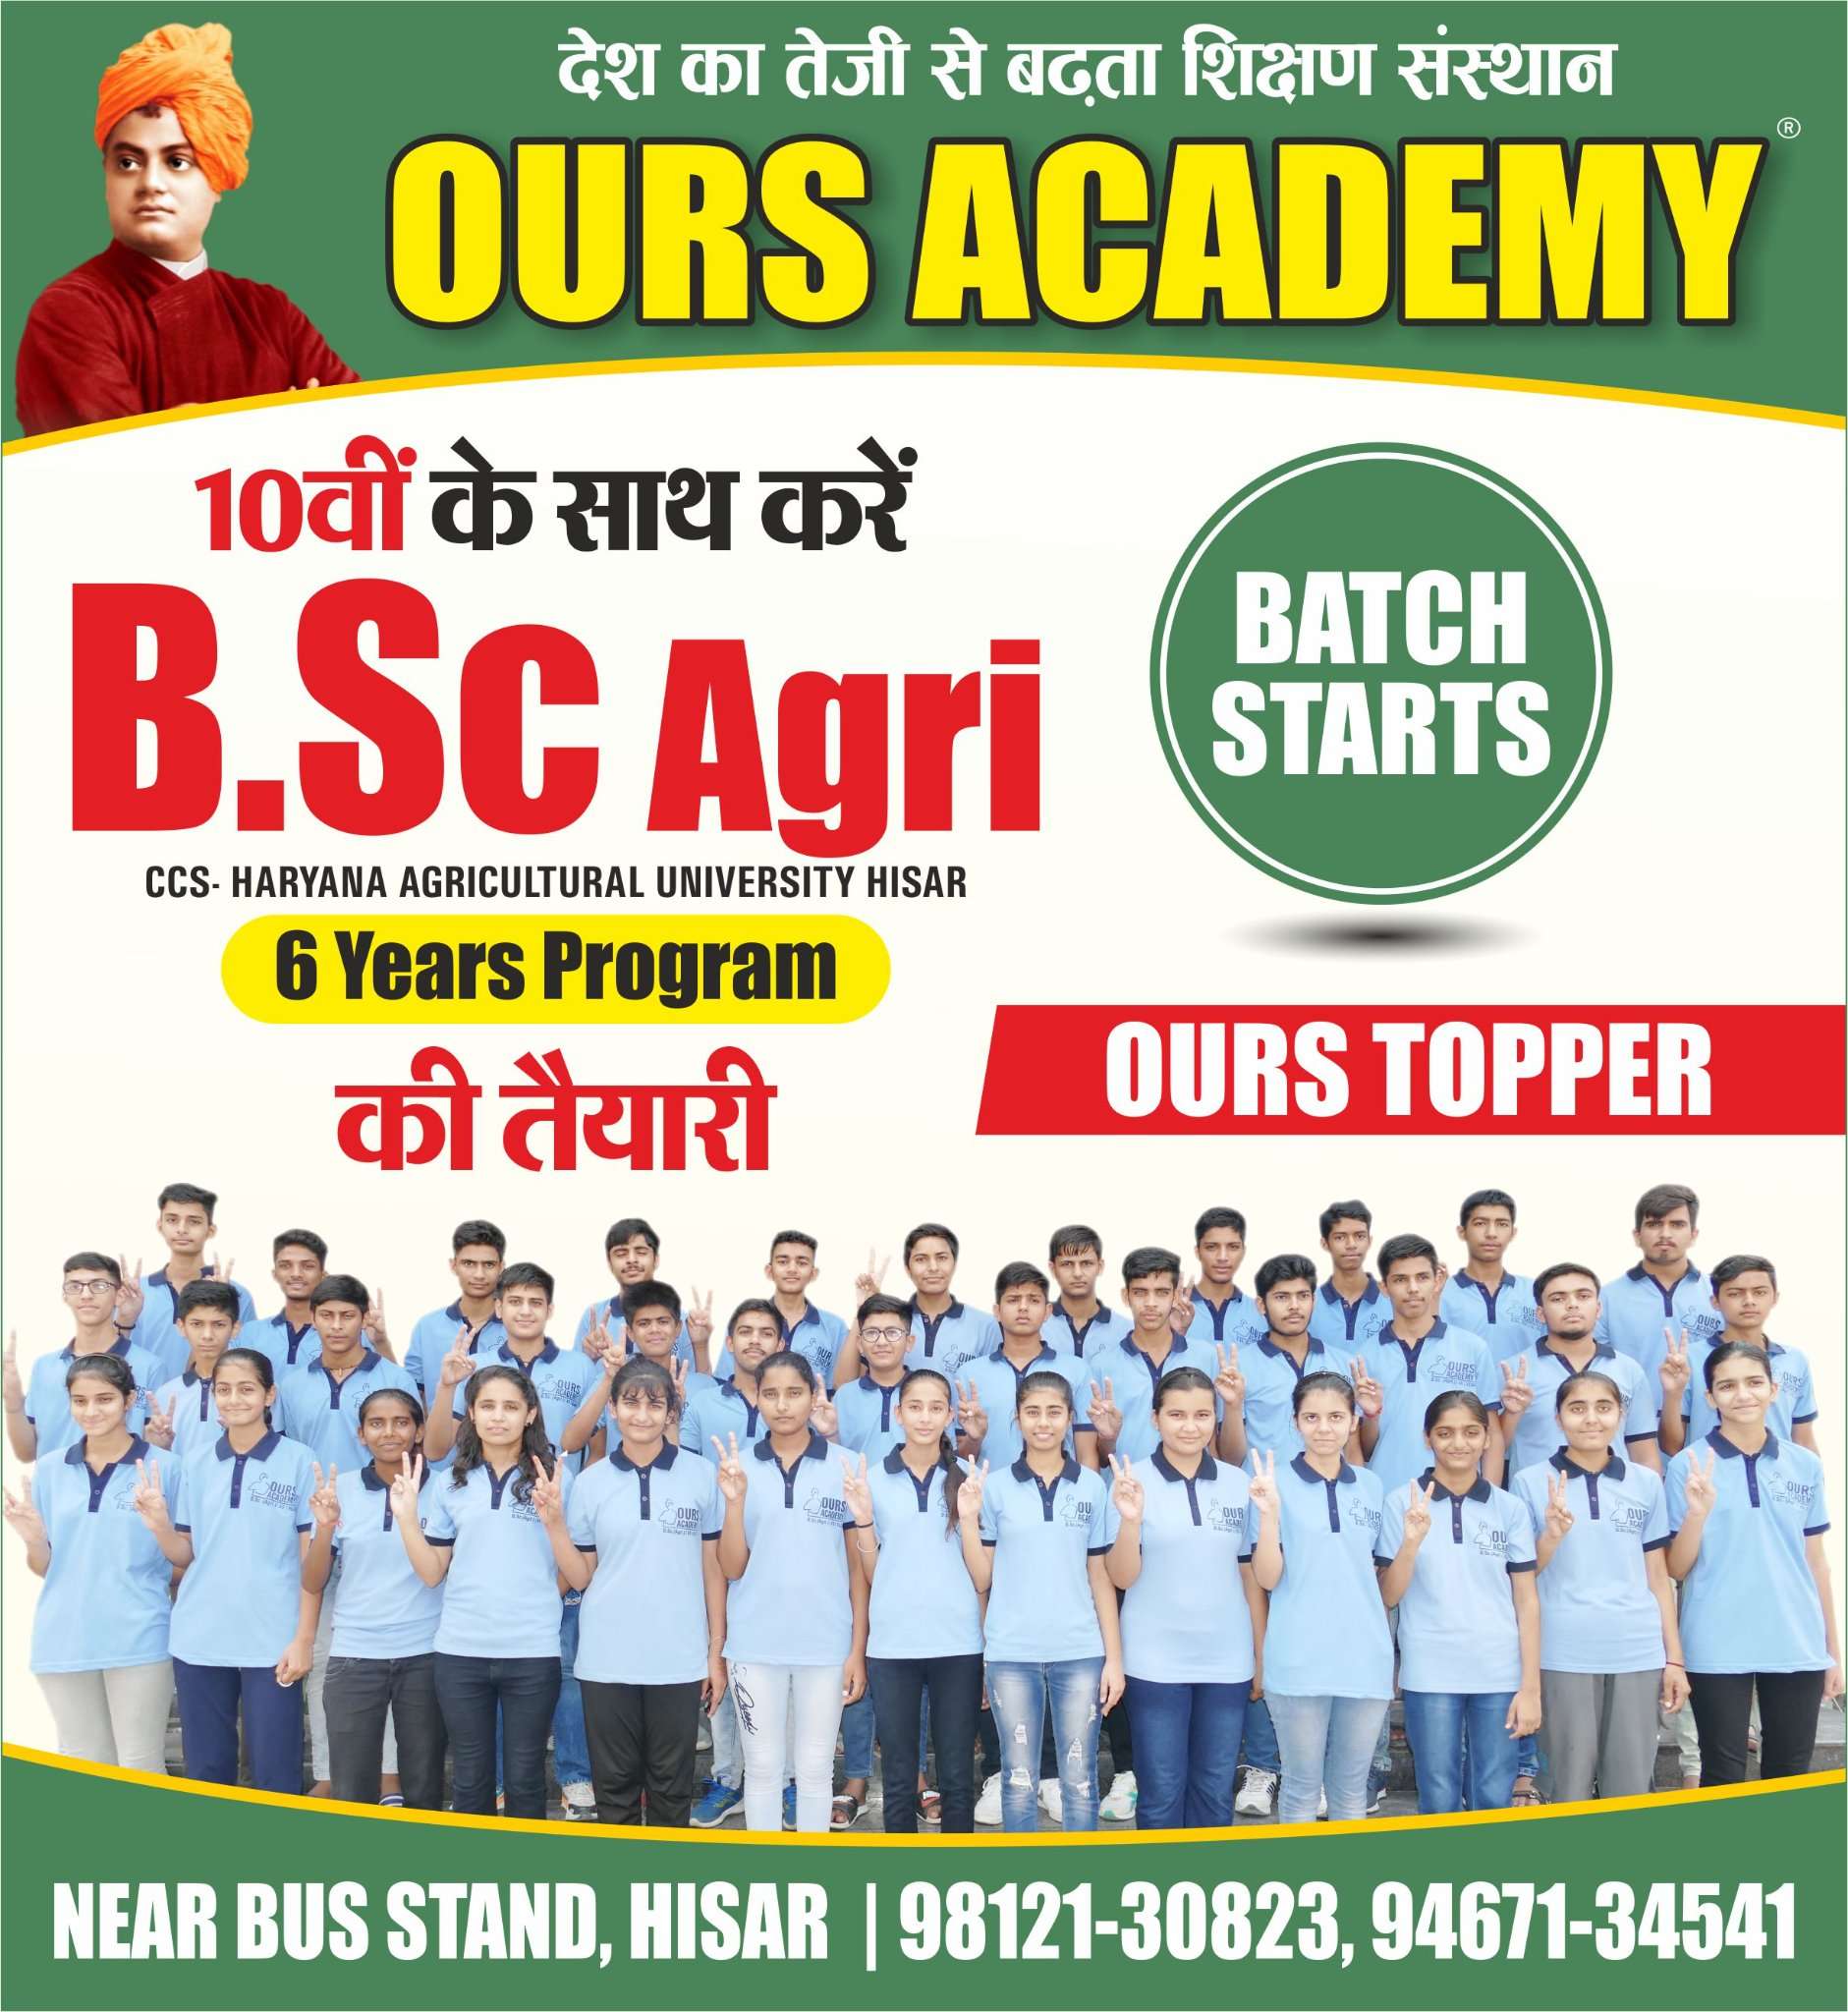 Our Academy: The Best Academy in Hisar